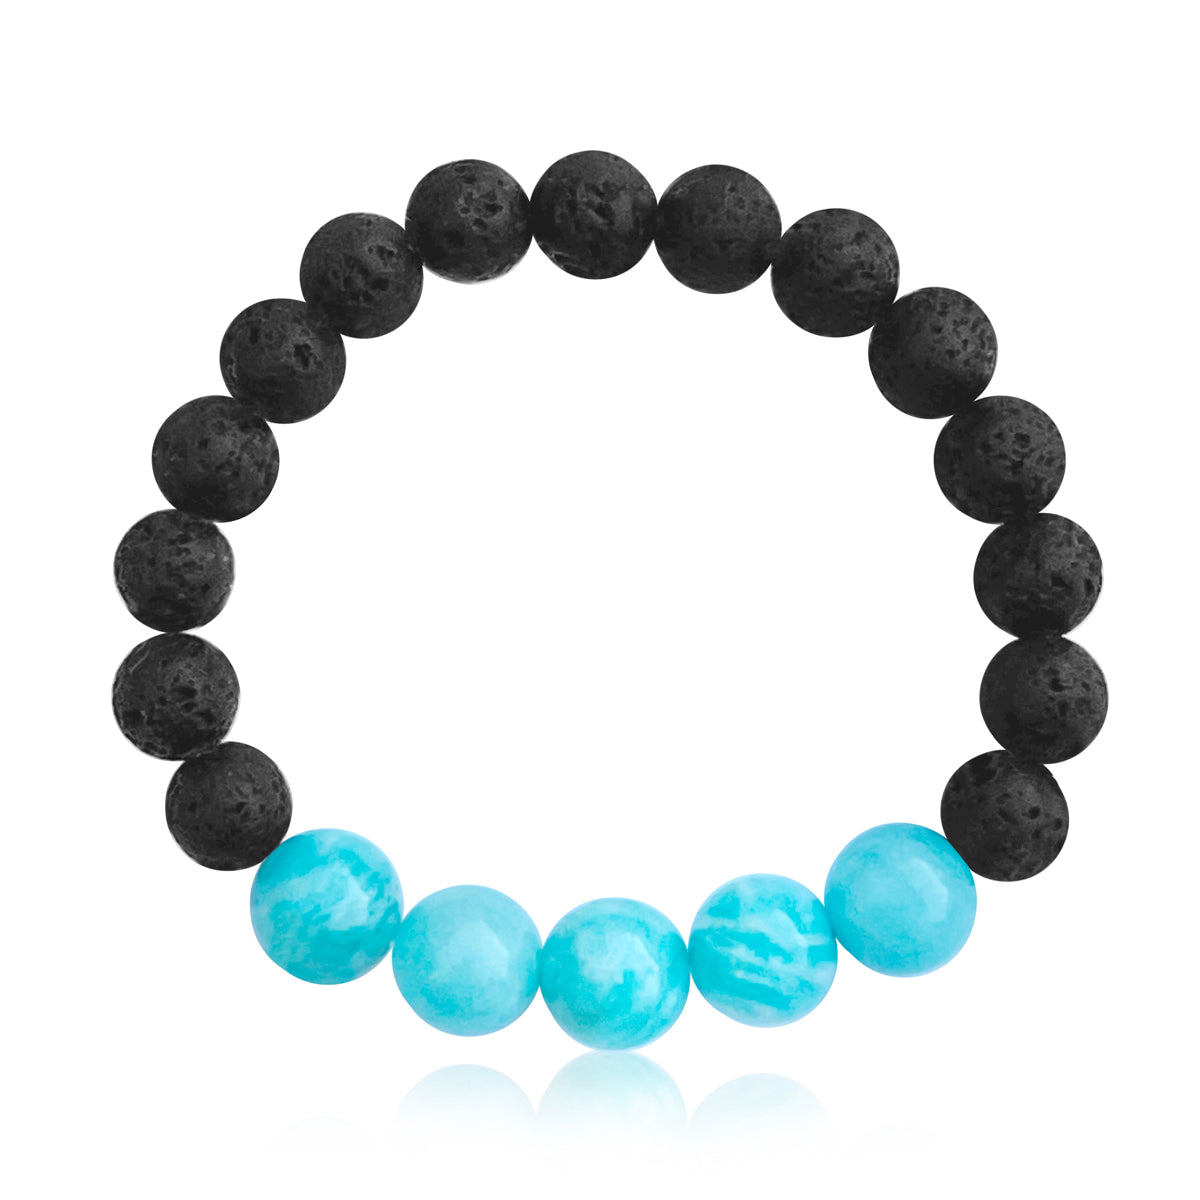 Rebirth Bracelet with Lava Stone and Amazonite. Formed from cooling magma, lava is thought to symbolize rebirth, and aid in releasing emotional baggage. “Each night, when I go to sleep, I die. And the next morning, when I wake up, I am reborn.” ― Mahatma Gandhi